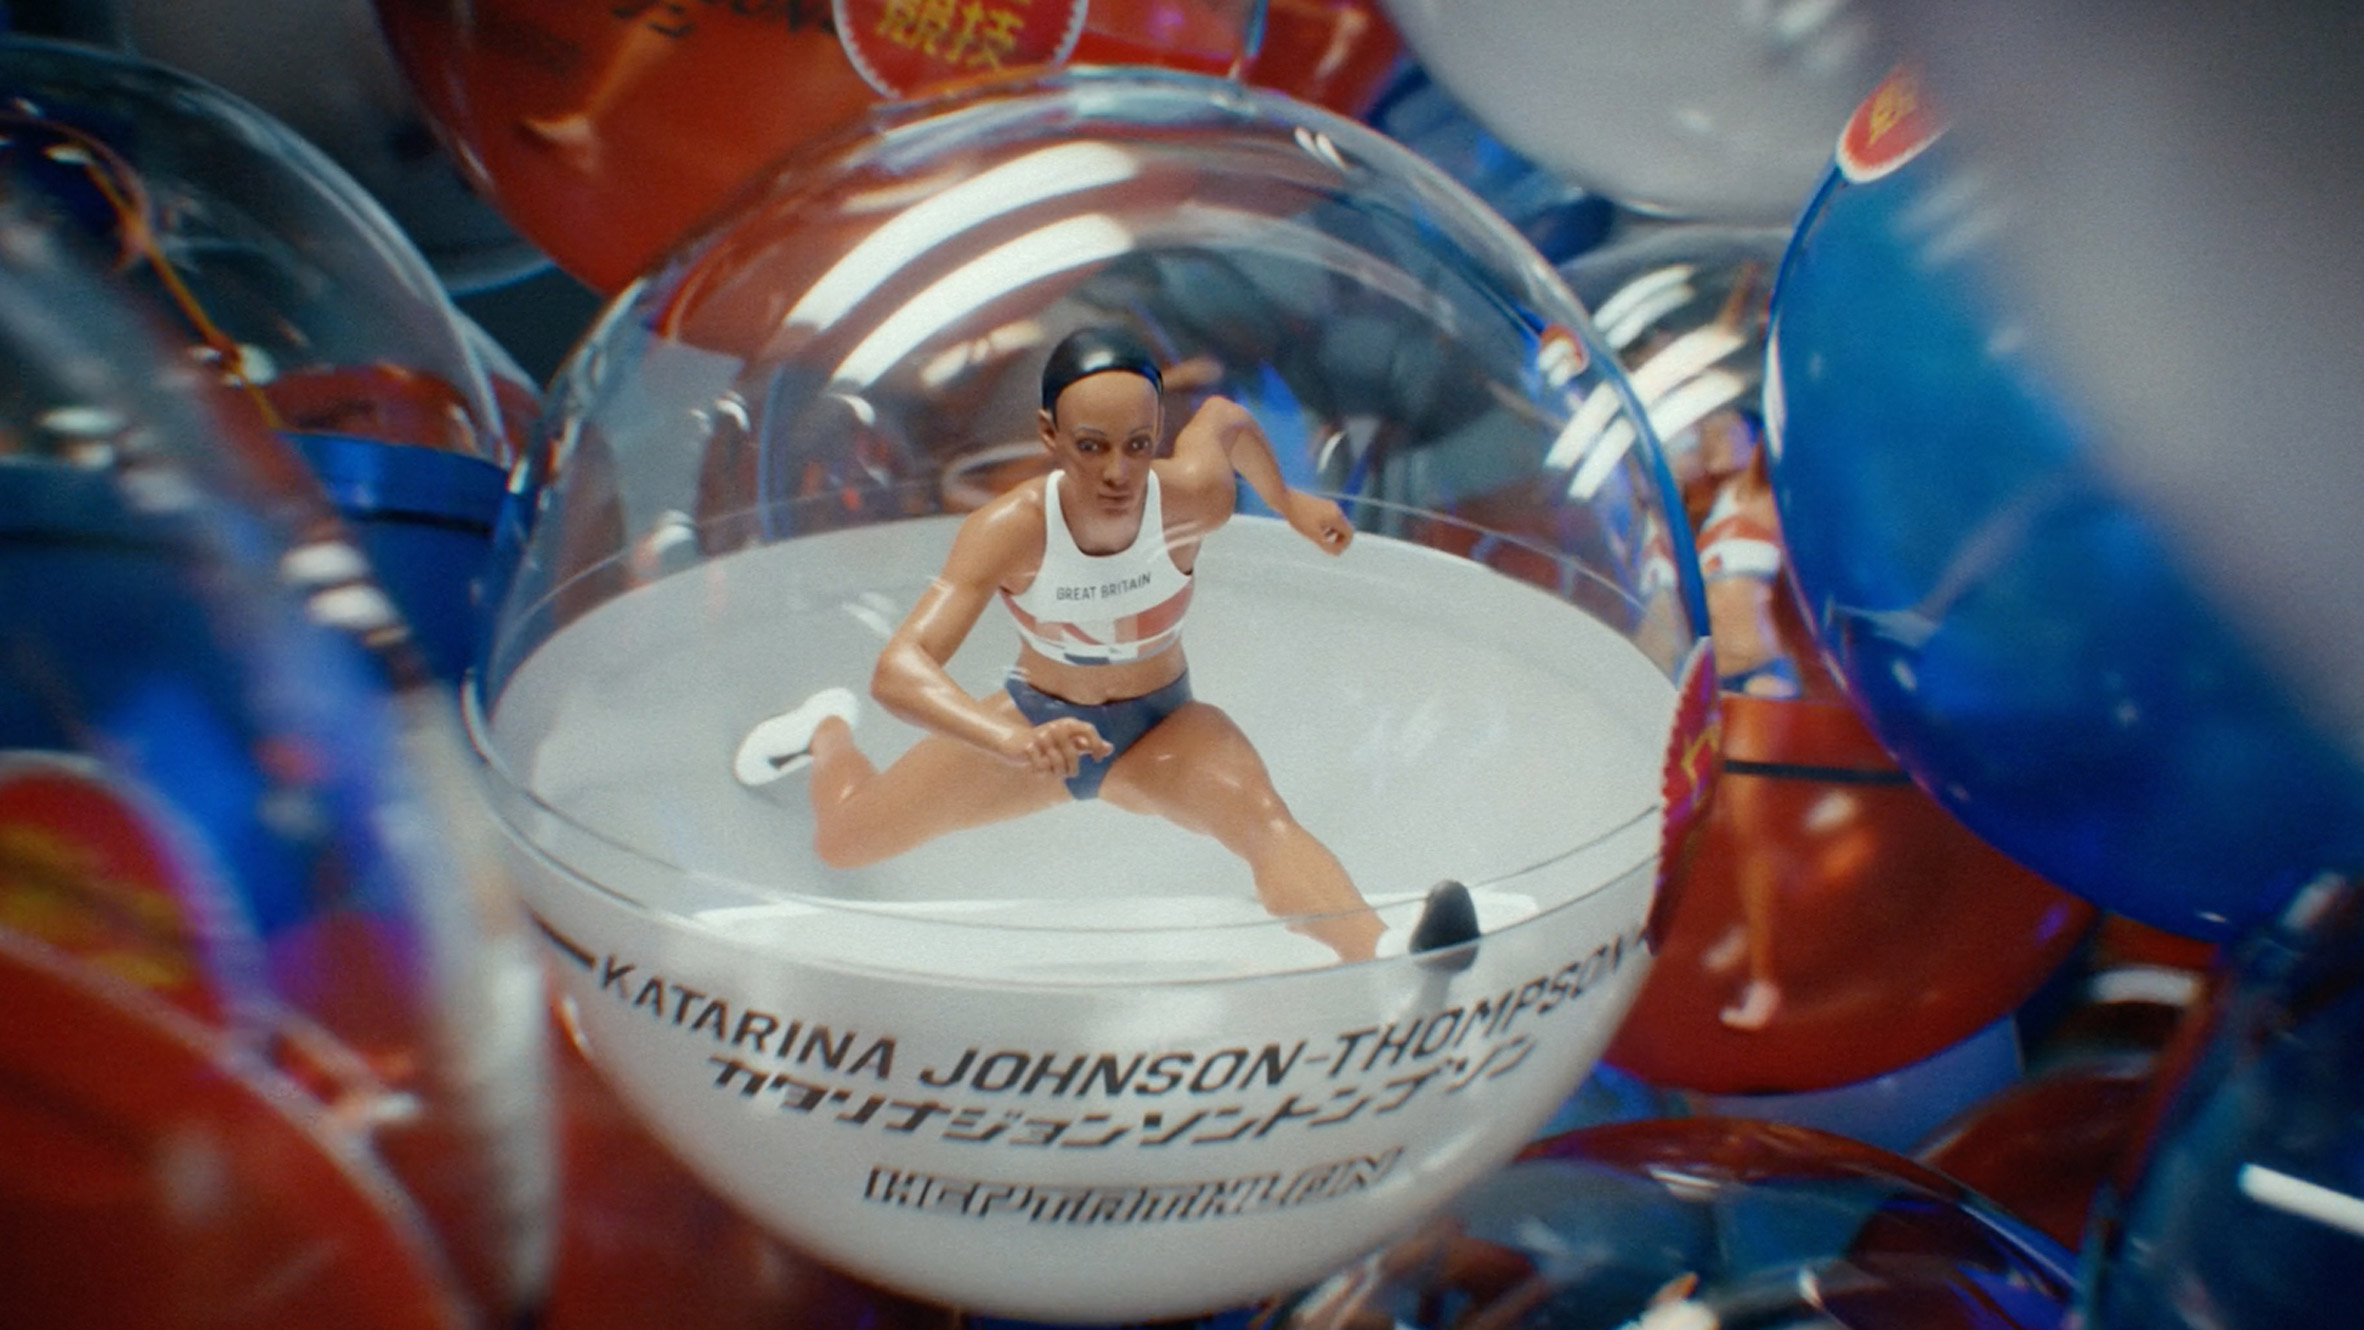 Heptathlete Katarina Johnson-Thompson features in gashapon toys in BBC trailer for Tokyo 2020 Olympics produced by Factory Fifteen and Nexus Studios